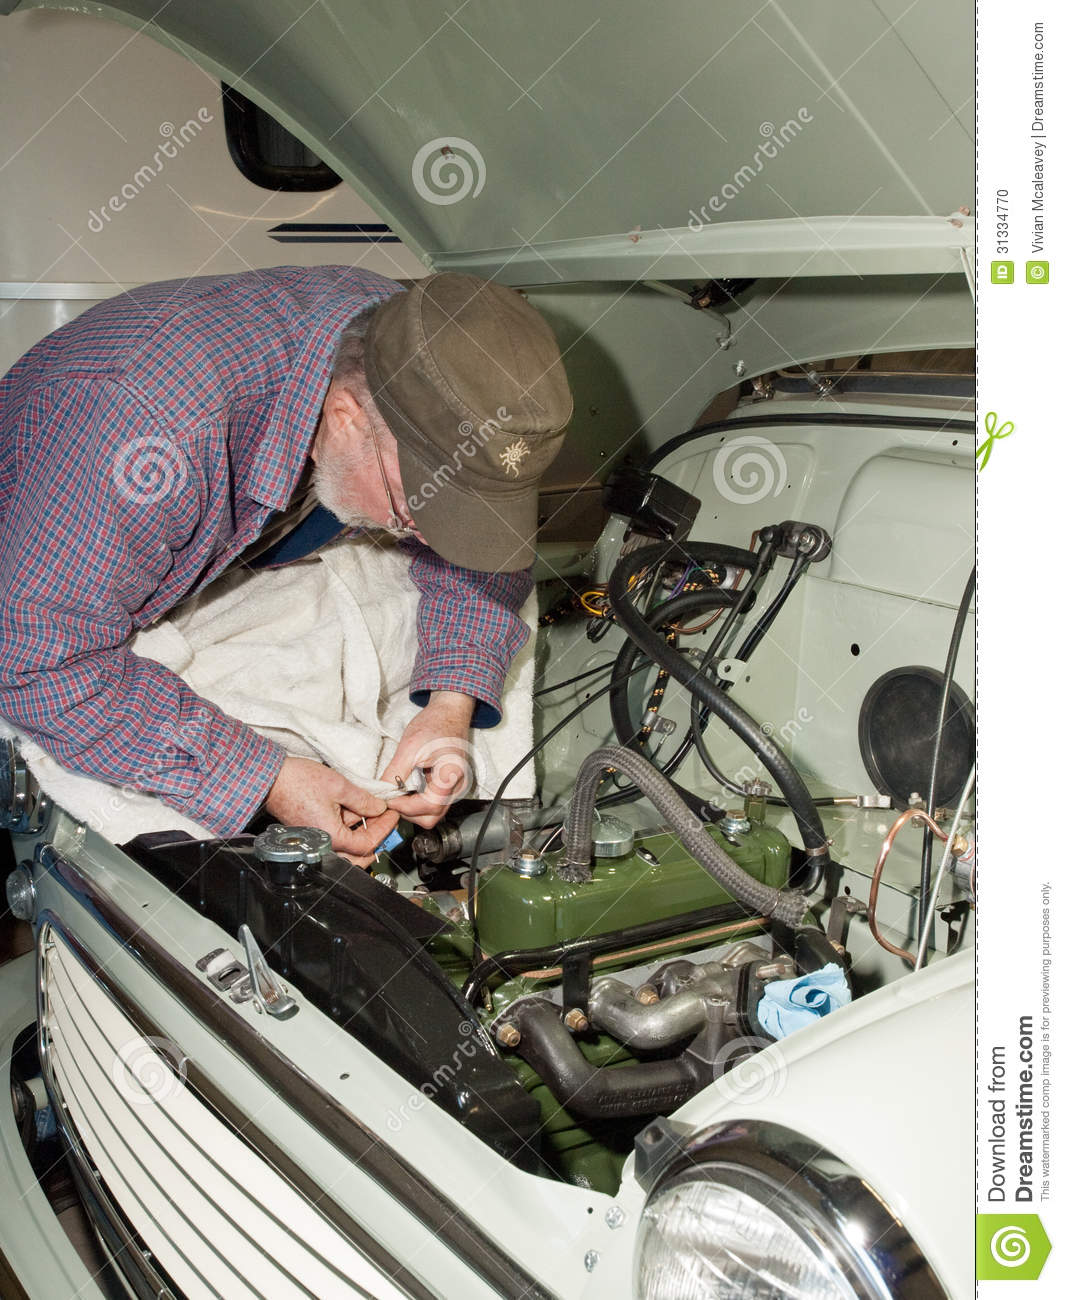 Senior Man Making Adjustments To The Engine Of A Vintage Car He Is